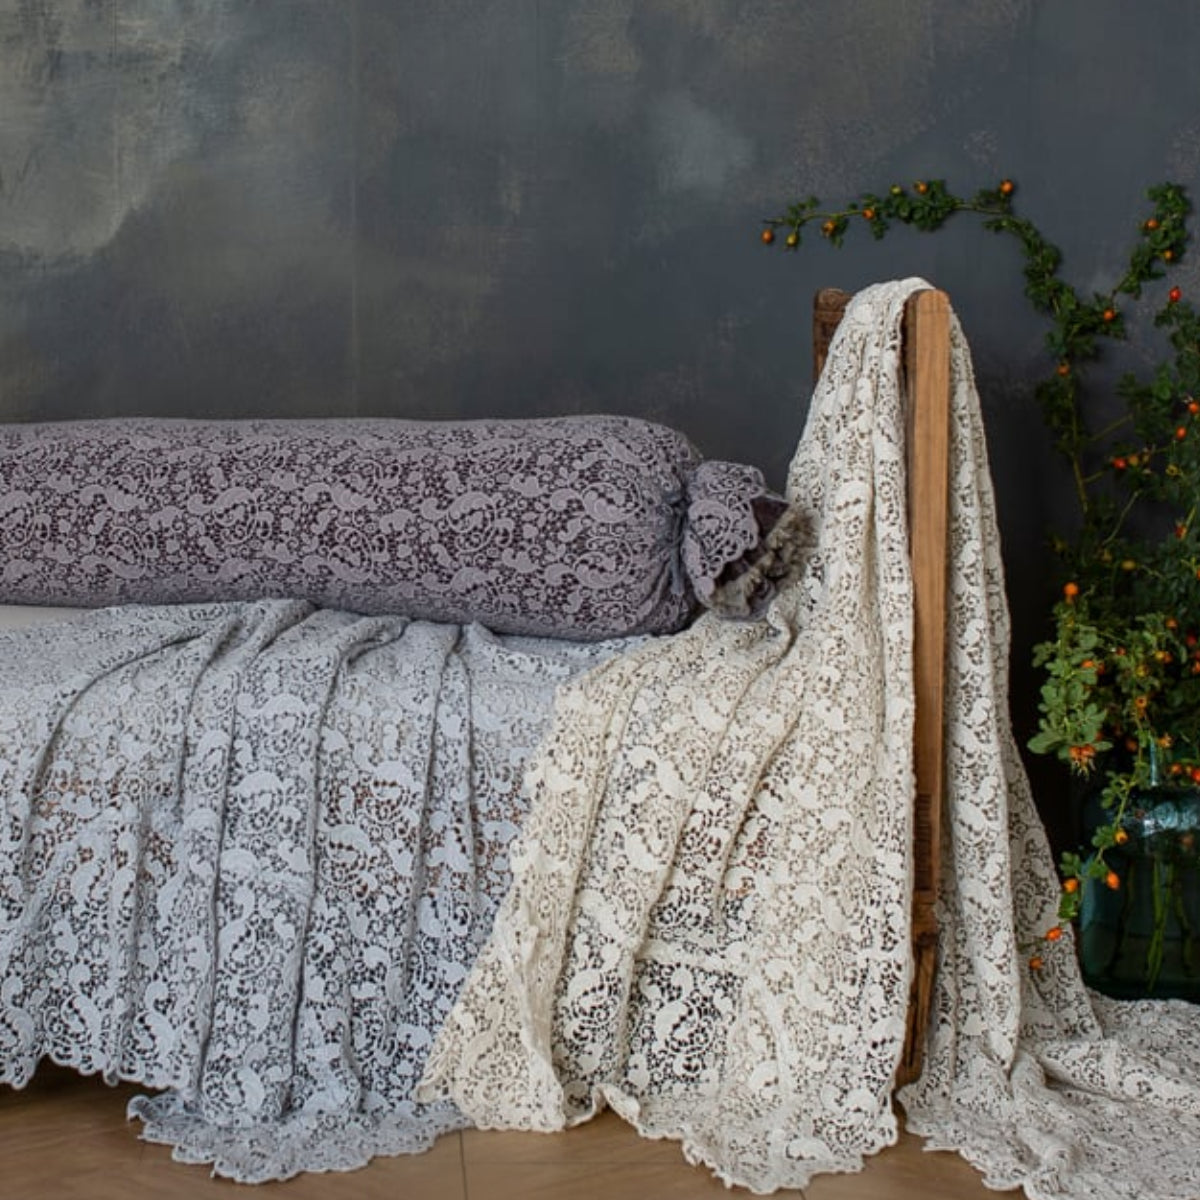 [allvariants]: lace bolster cover on a bench with lace bed scarves against a limewash background. 